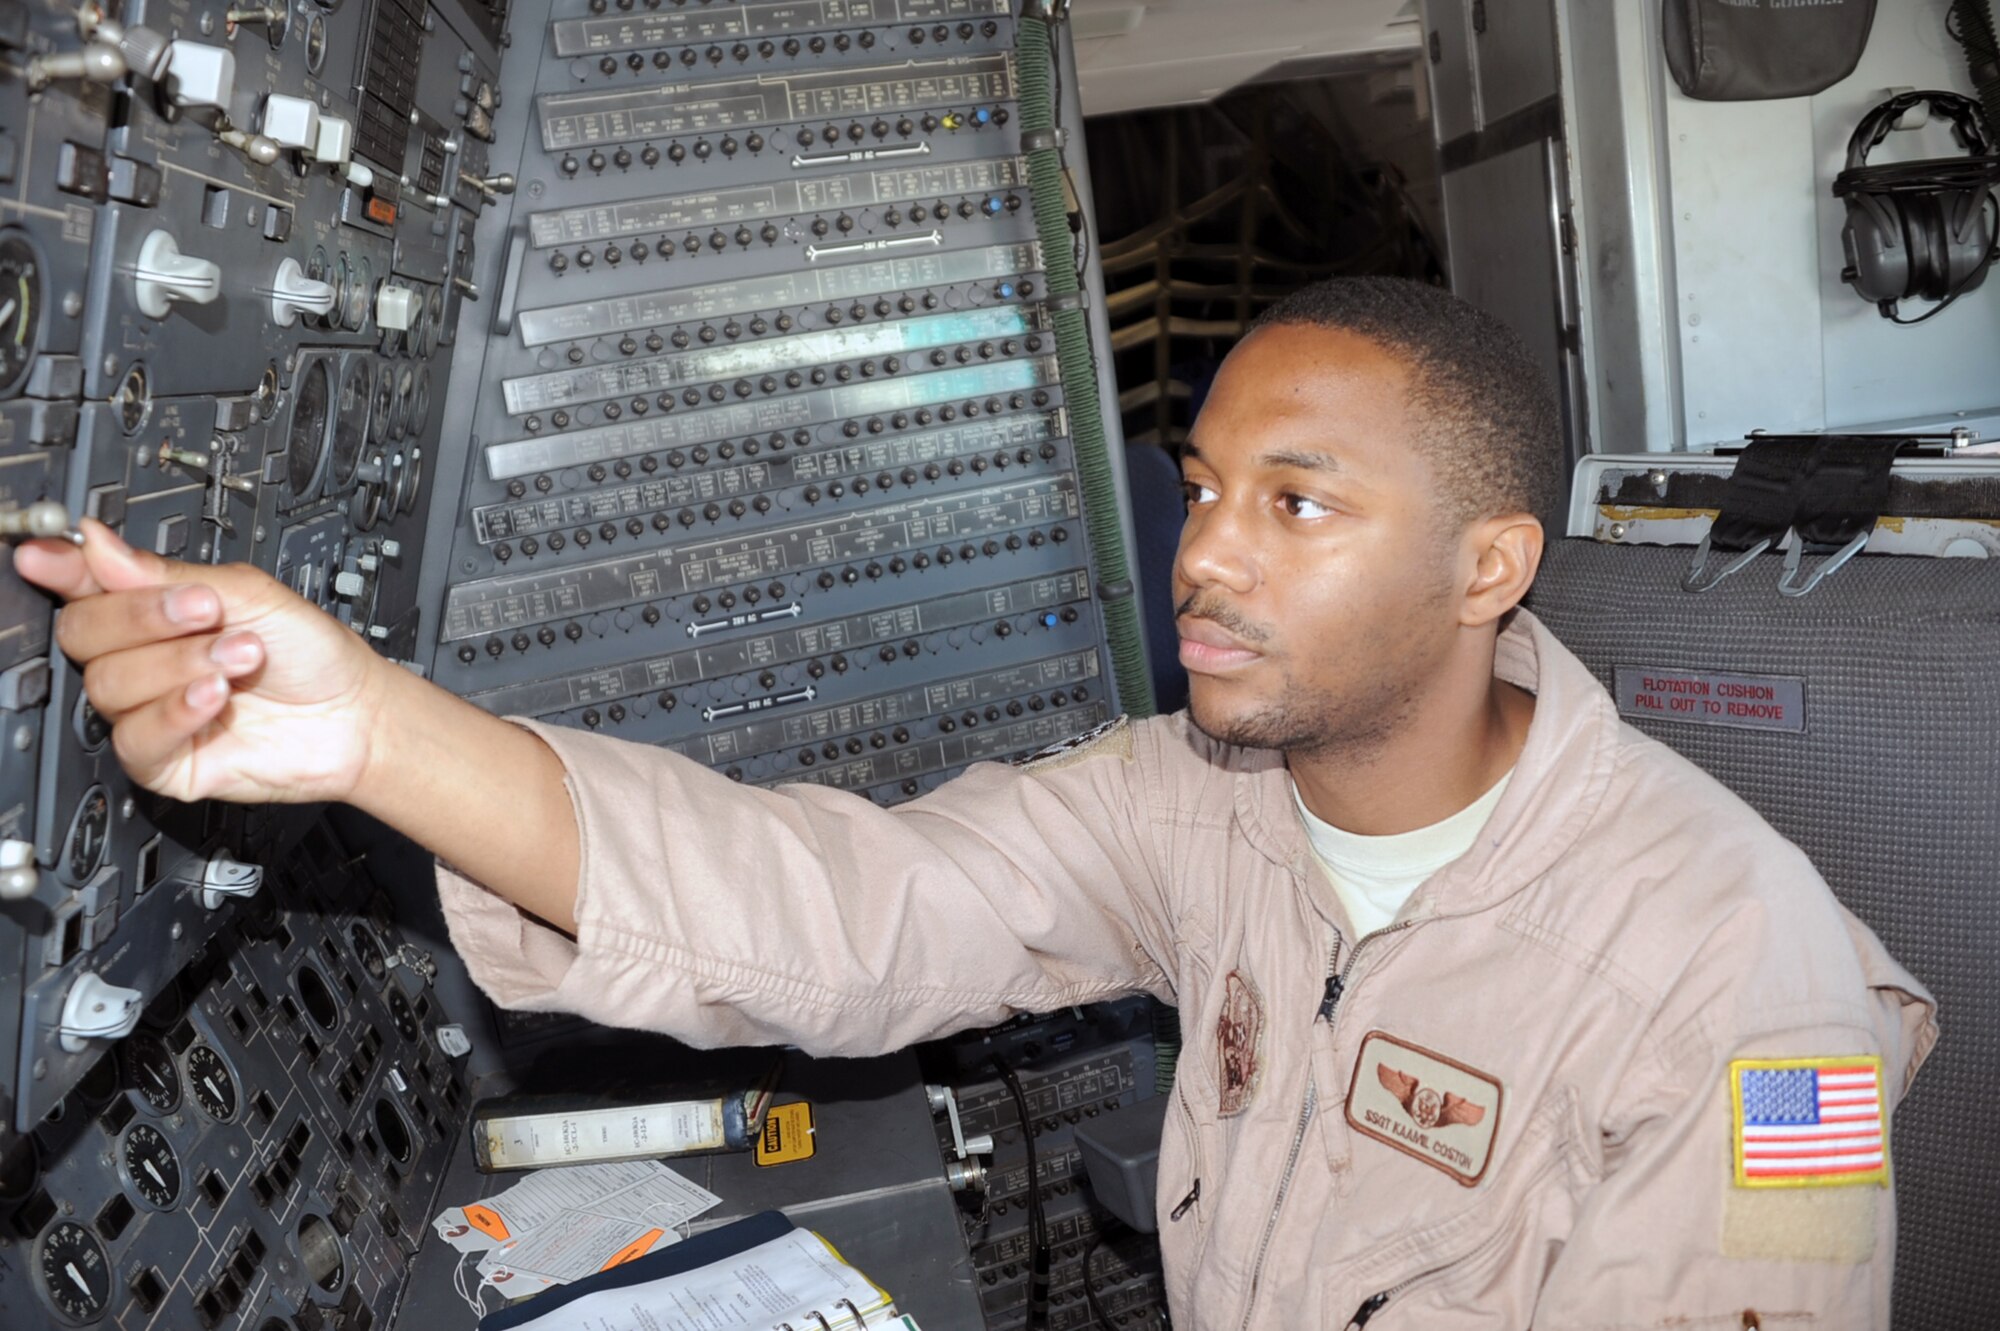 Staff Sgt. Kaamil Coston, KC-10 Extender flight engineer with the 908th Expeditionary Air Refueling Squadron at a non-disclosed base in Southwest Asia, works at his station in a KC-10 Jan. 8, 2009.  Sergeant Coston, deployed from the 2nd Air Refueling Squadron at McGuire Air Force Base, N.J., ensures the KC-10 is ready to fly when a mission is prepared -- essentially the "systems expert" for the airframe.  The KC-10 is an Air Mobility Command advanced tanker and cargo aircraft designed to provide increased global mobility for U.S. armed forces. Although the KC-l0's primary mission is aerial refueling, it can combine the tasks of a tanker and cargo aircraft by refueling fighters and simultaneously carry the fighter support personnel and equipment on overseas deployments. Sergeant Coston's hometown is Staten Island, N.Y.  (U.S. Air Force Photo/Tech. Sgt. Scott T. Sturkol/Released) 